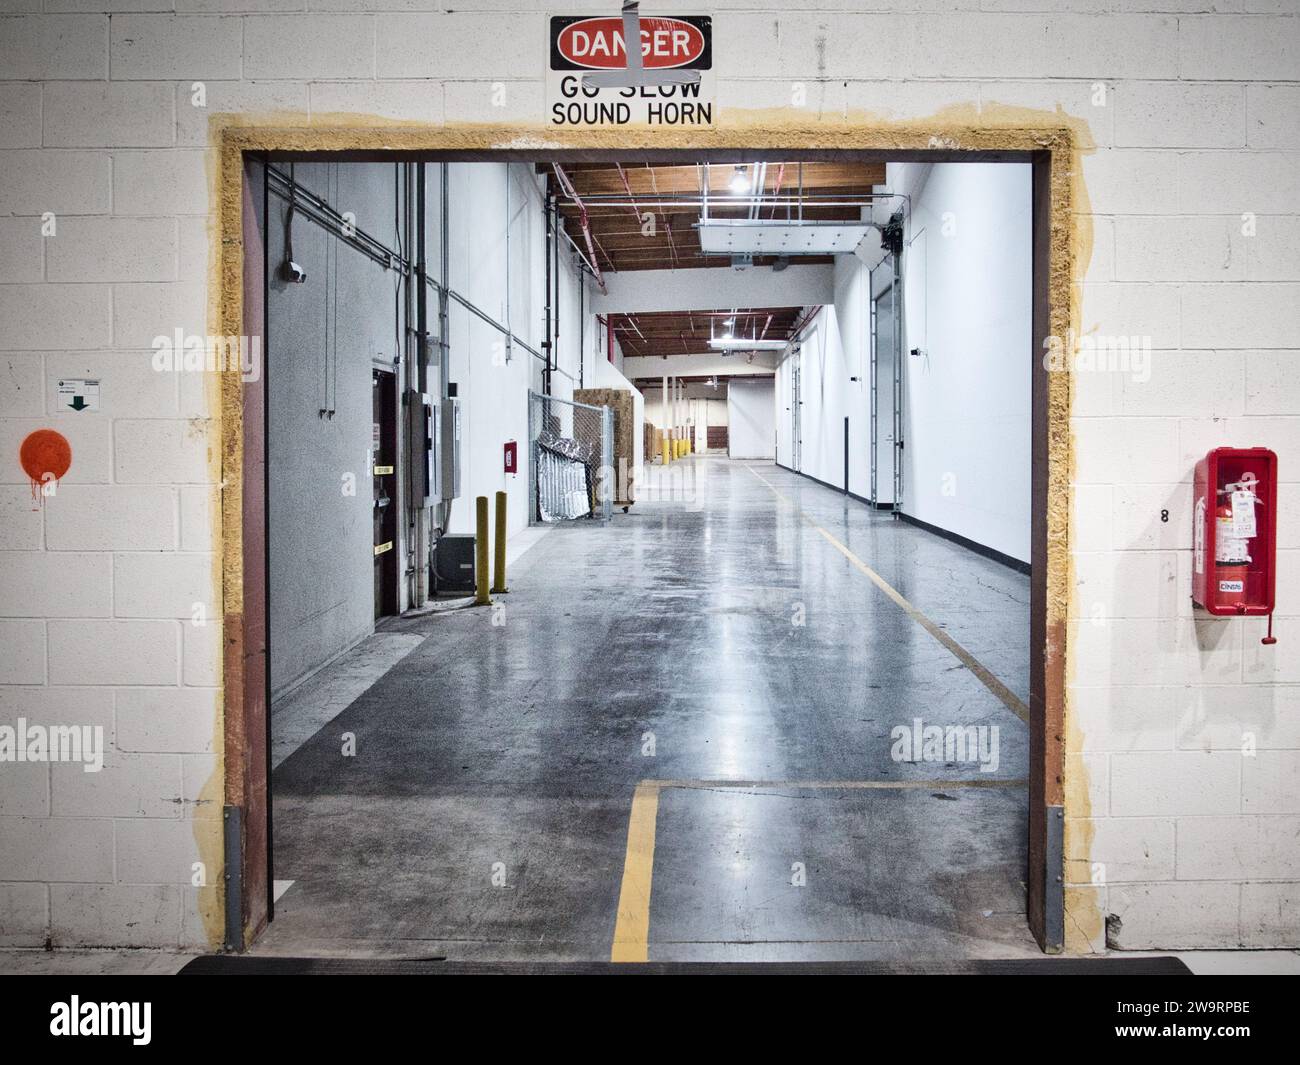 Opening to hallway in an industrial warehouse with concrete walls and floors. Austere look. Fire extinguisher and 'danger' sign. Stock Photo